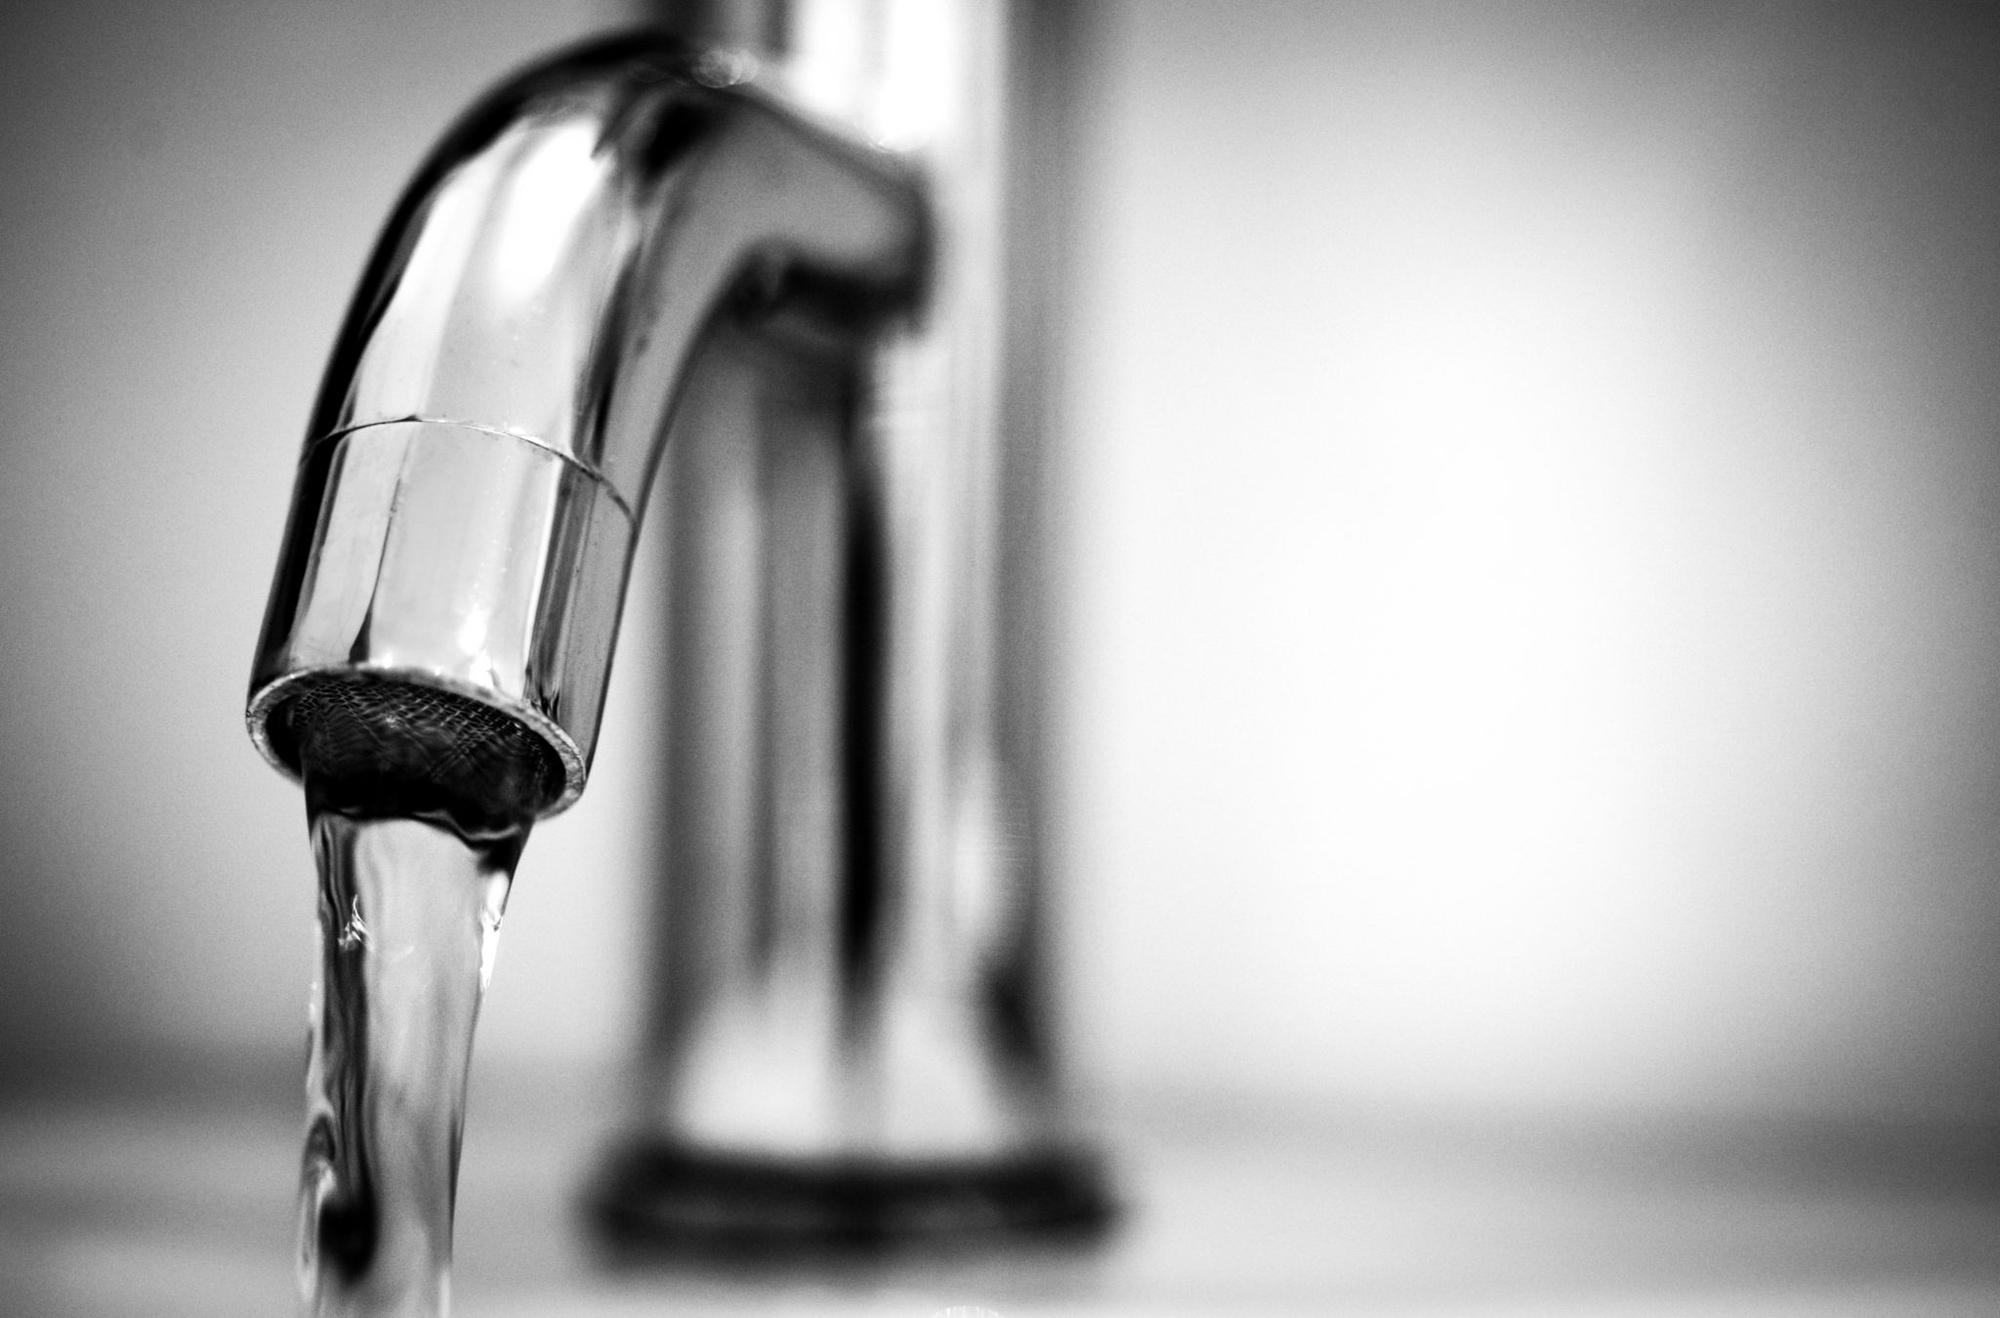 Rumours of Maxville water project being over-budget are untrue: township treasurer